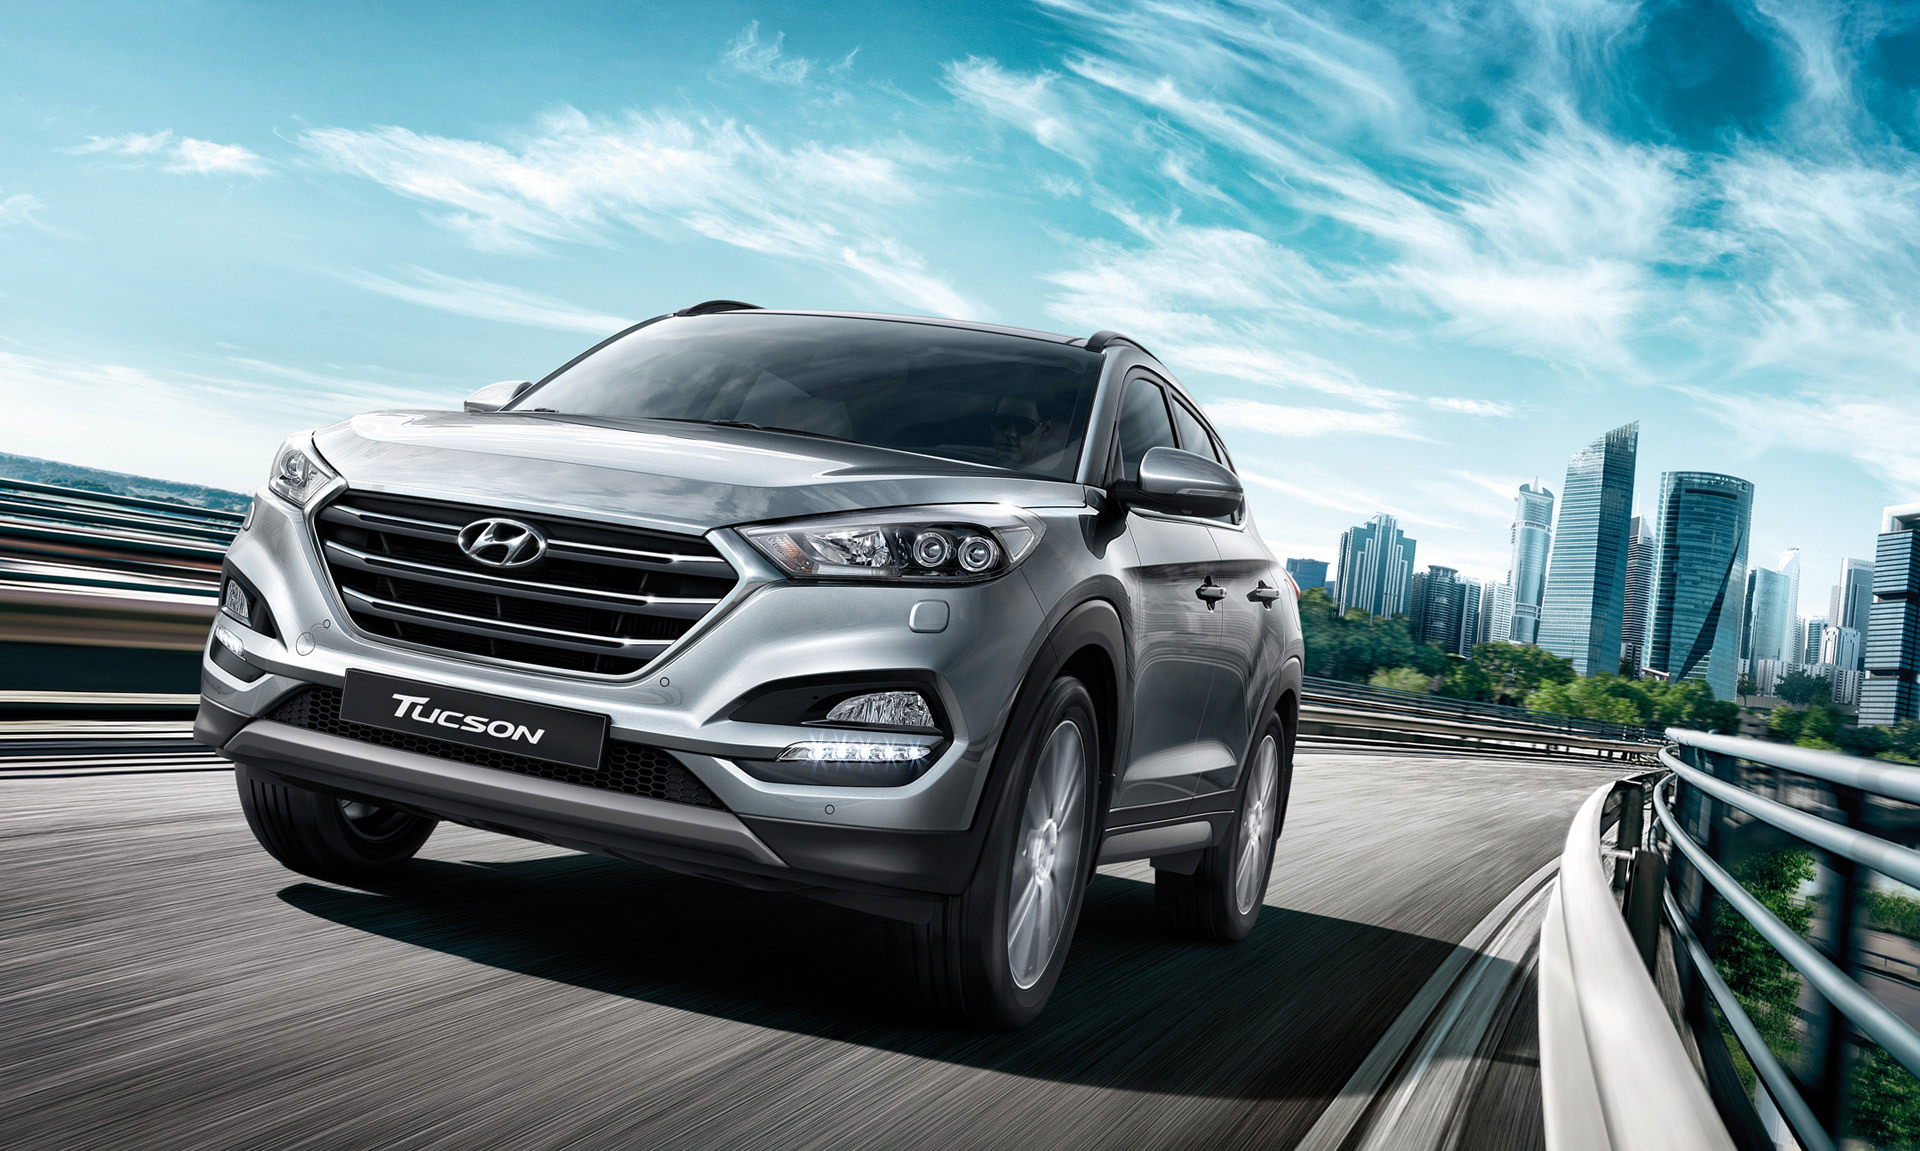 2018 Hyundai Tucson Price in Nepal, Images, Specifications